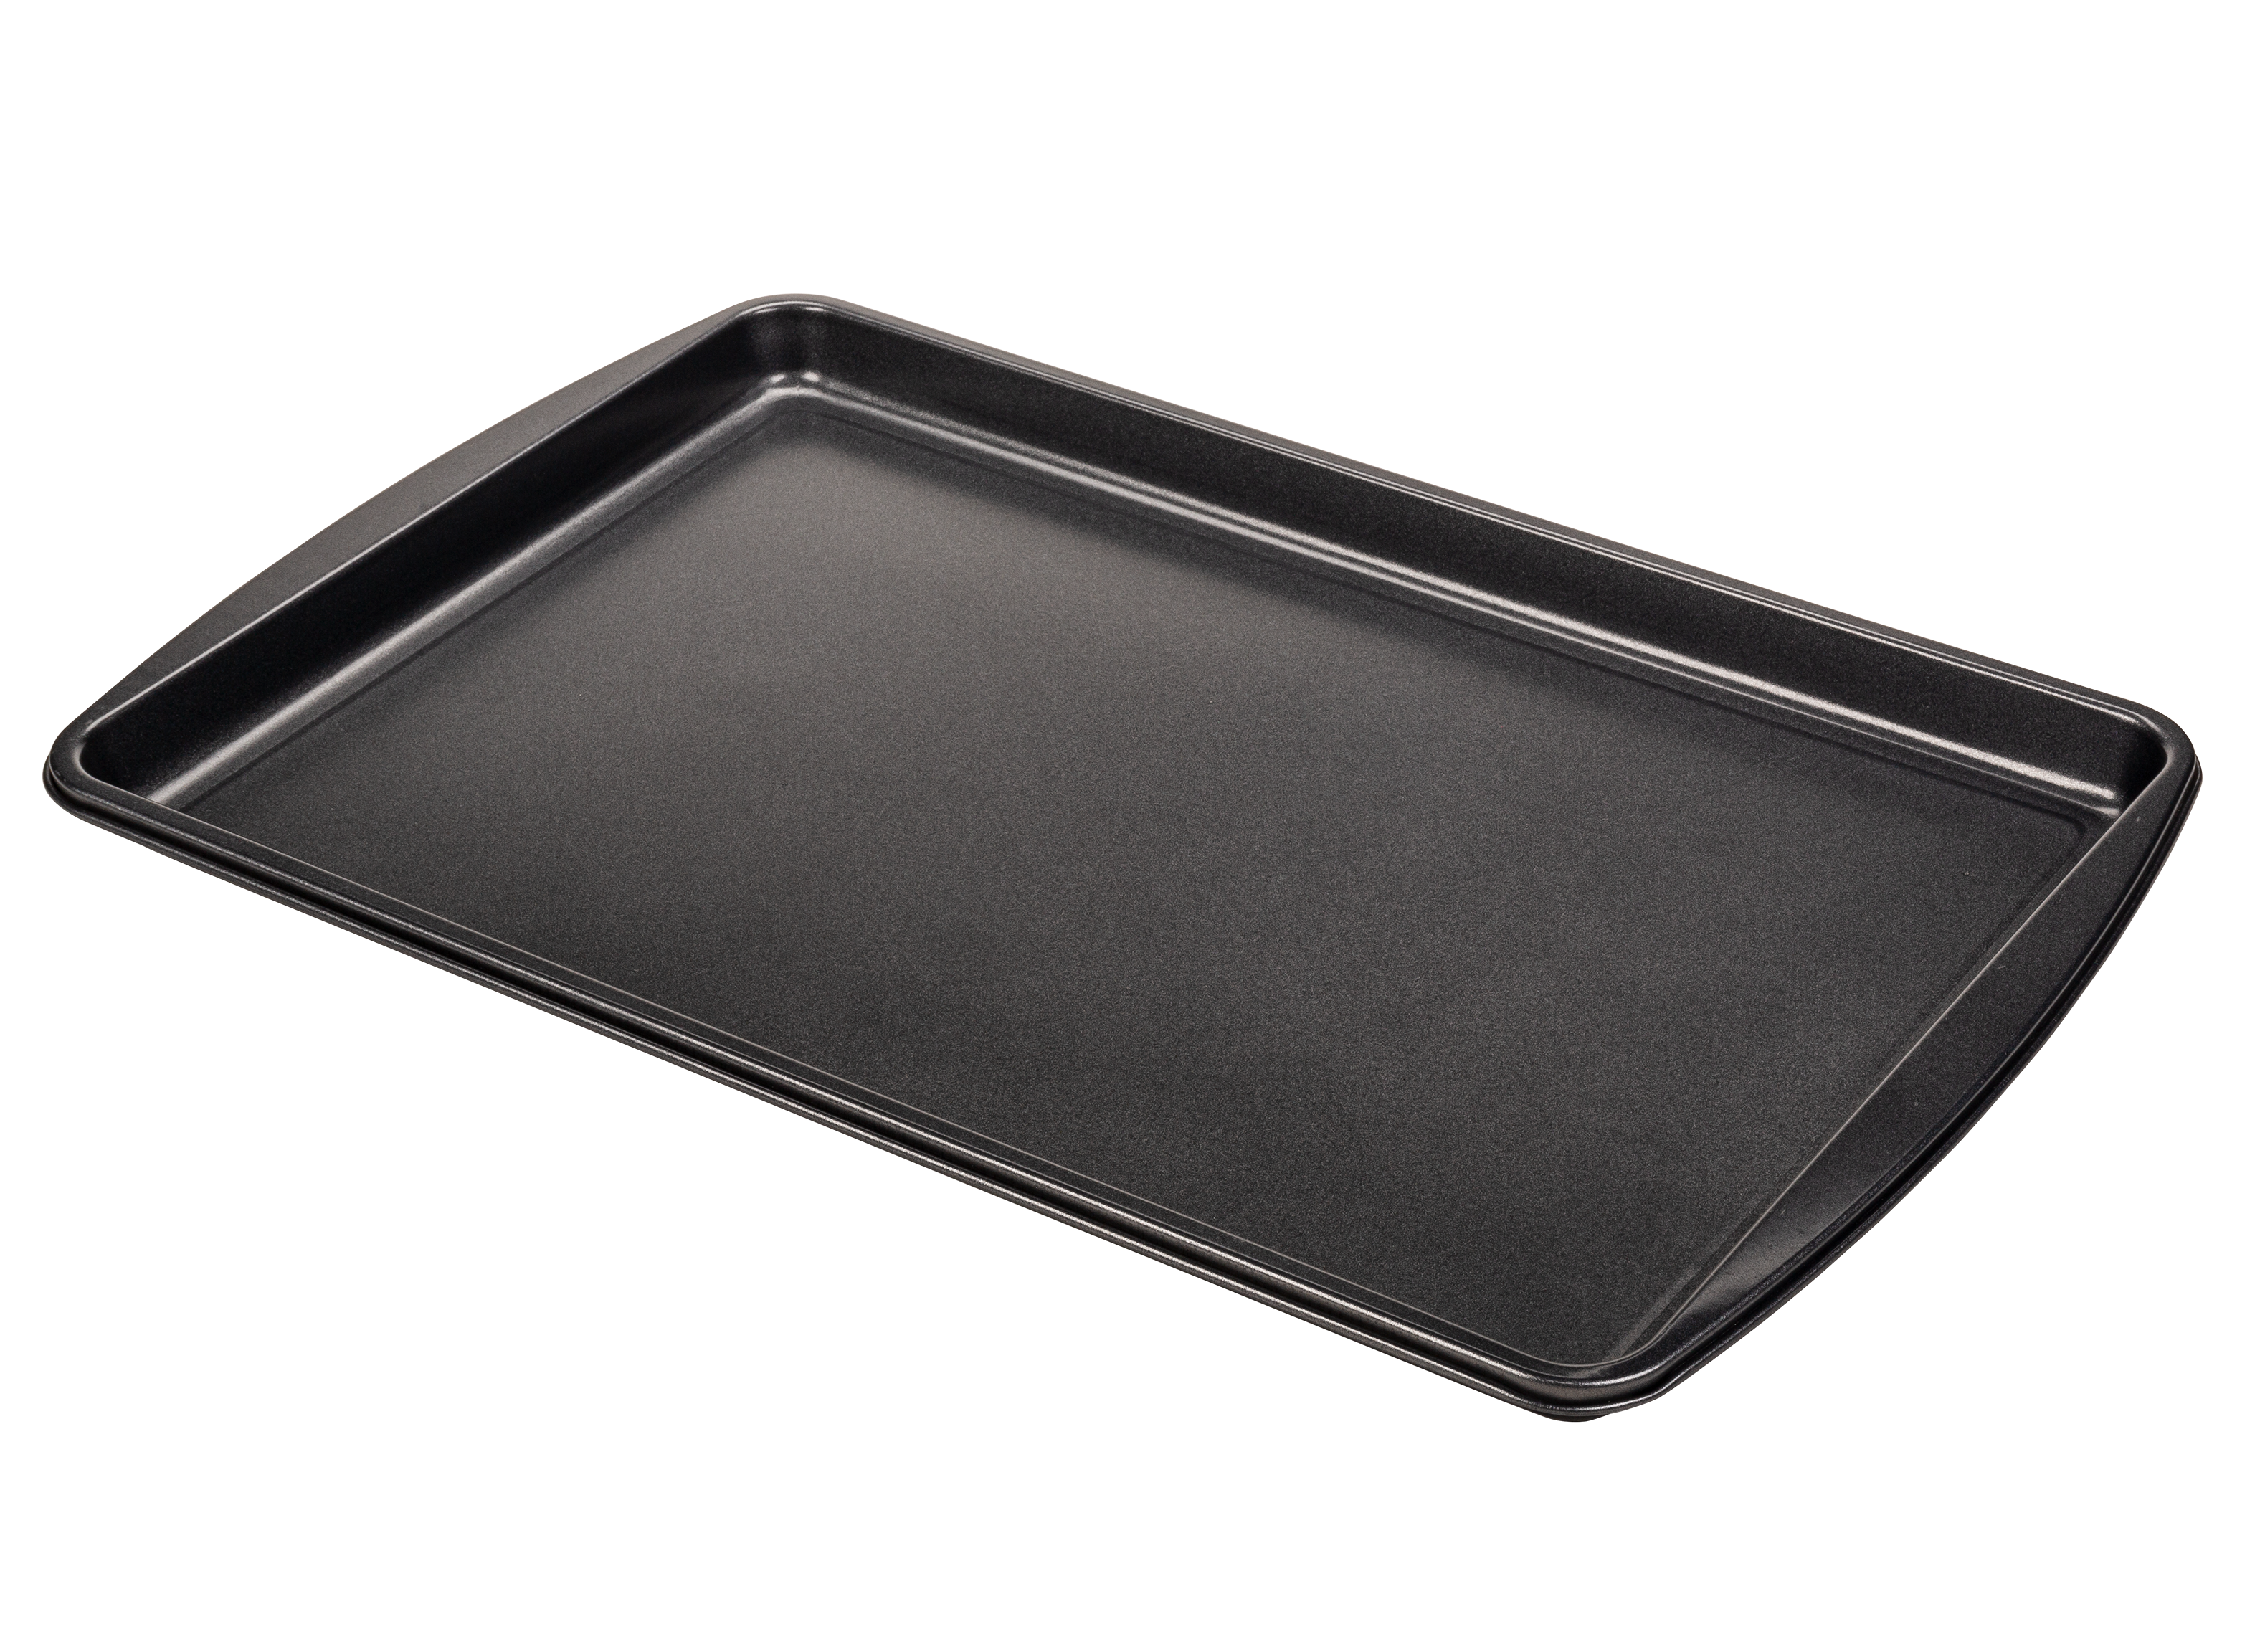 https://crdms.images.consumerreports.org/prod/products/cr/models/404179-sheet-pans-simply-essential-nonstick-jelly-roll-pan-10022113.png